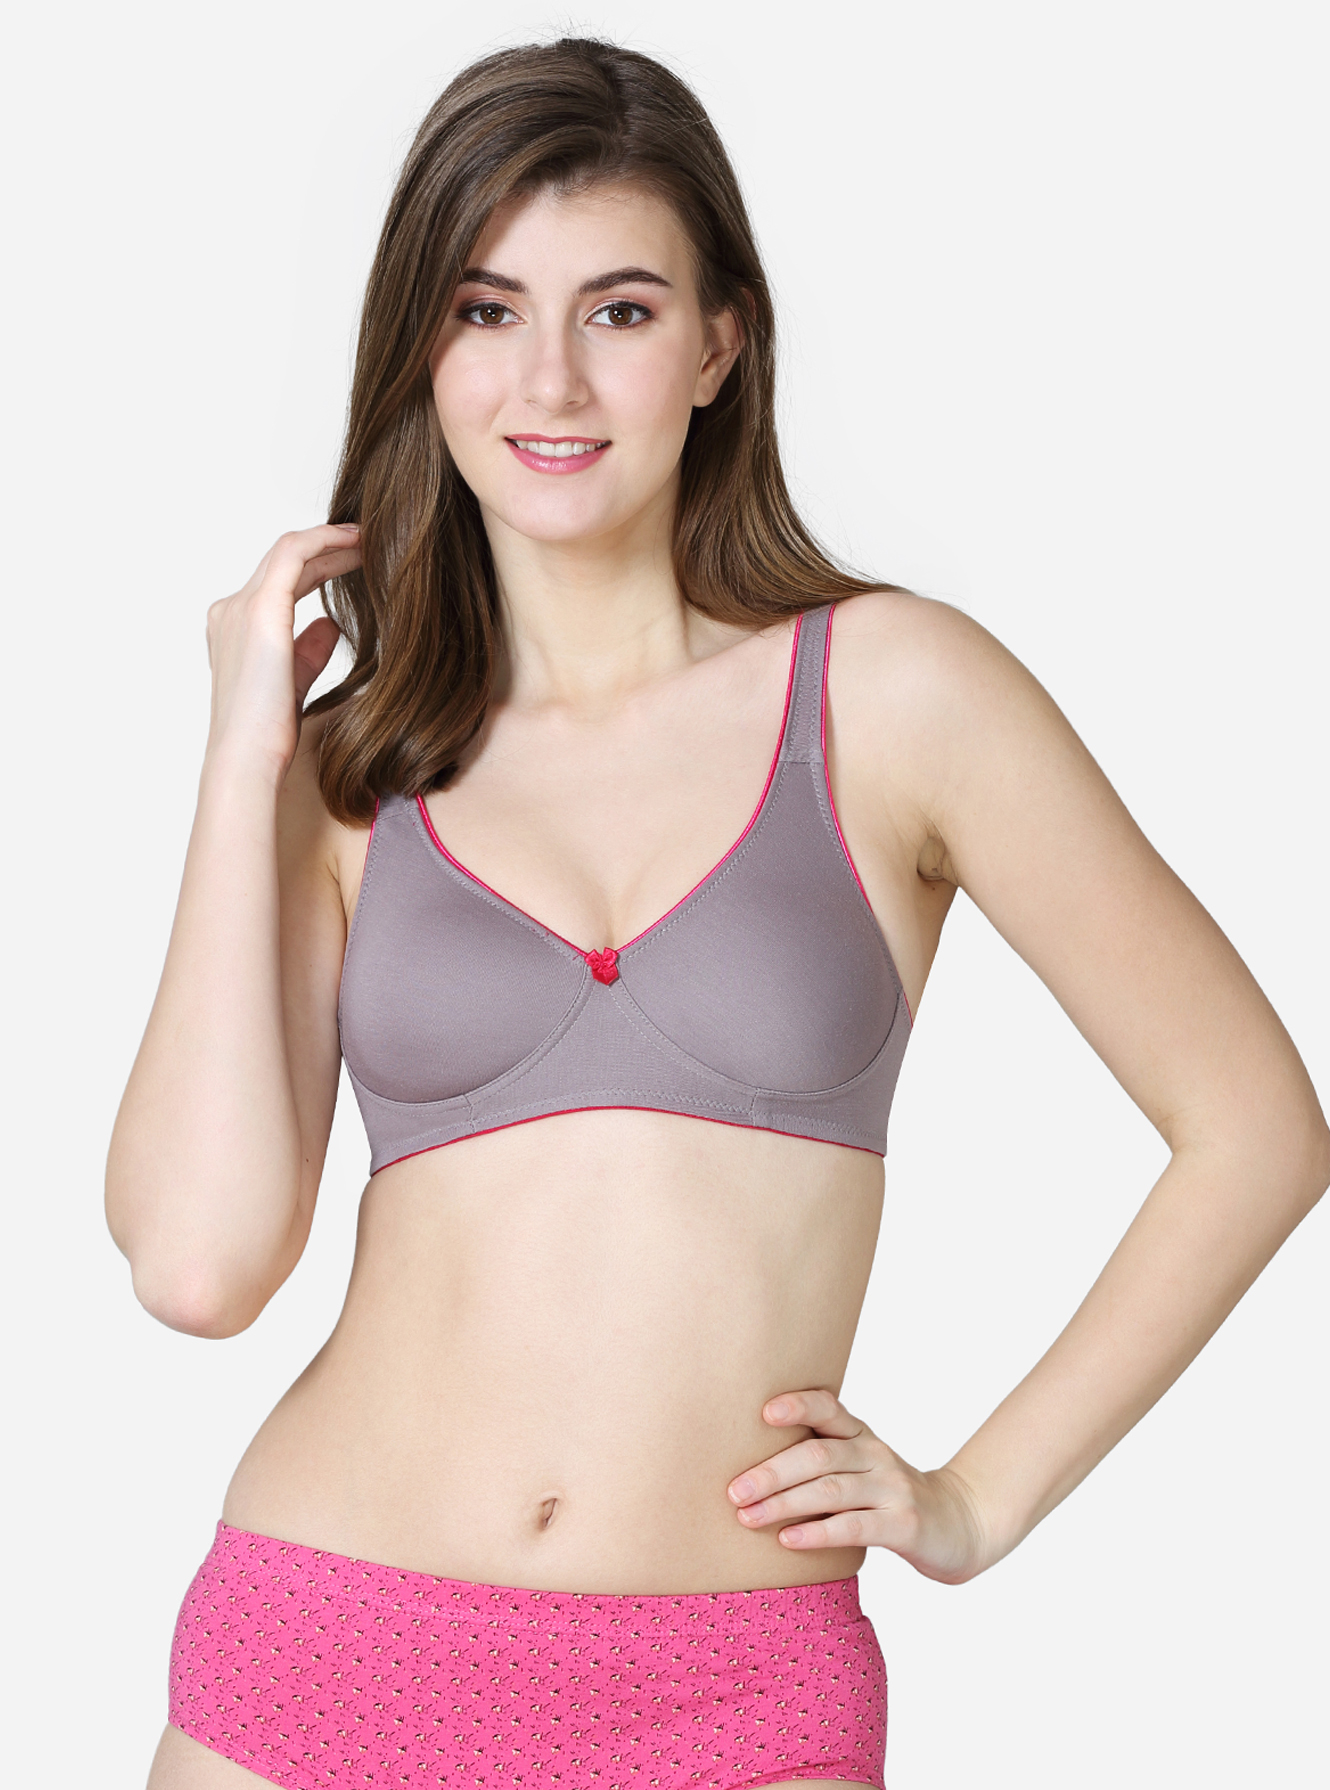 Buy VSTAR Sarah Double Layered, Knitted Moulded Cup Bra for Firm